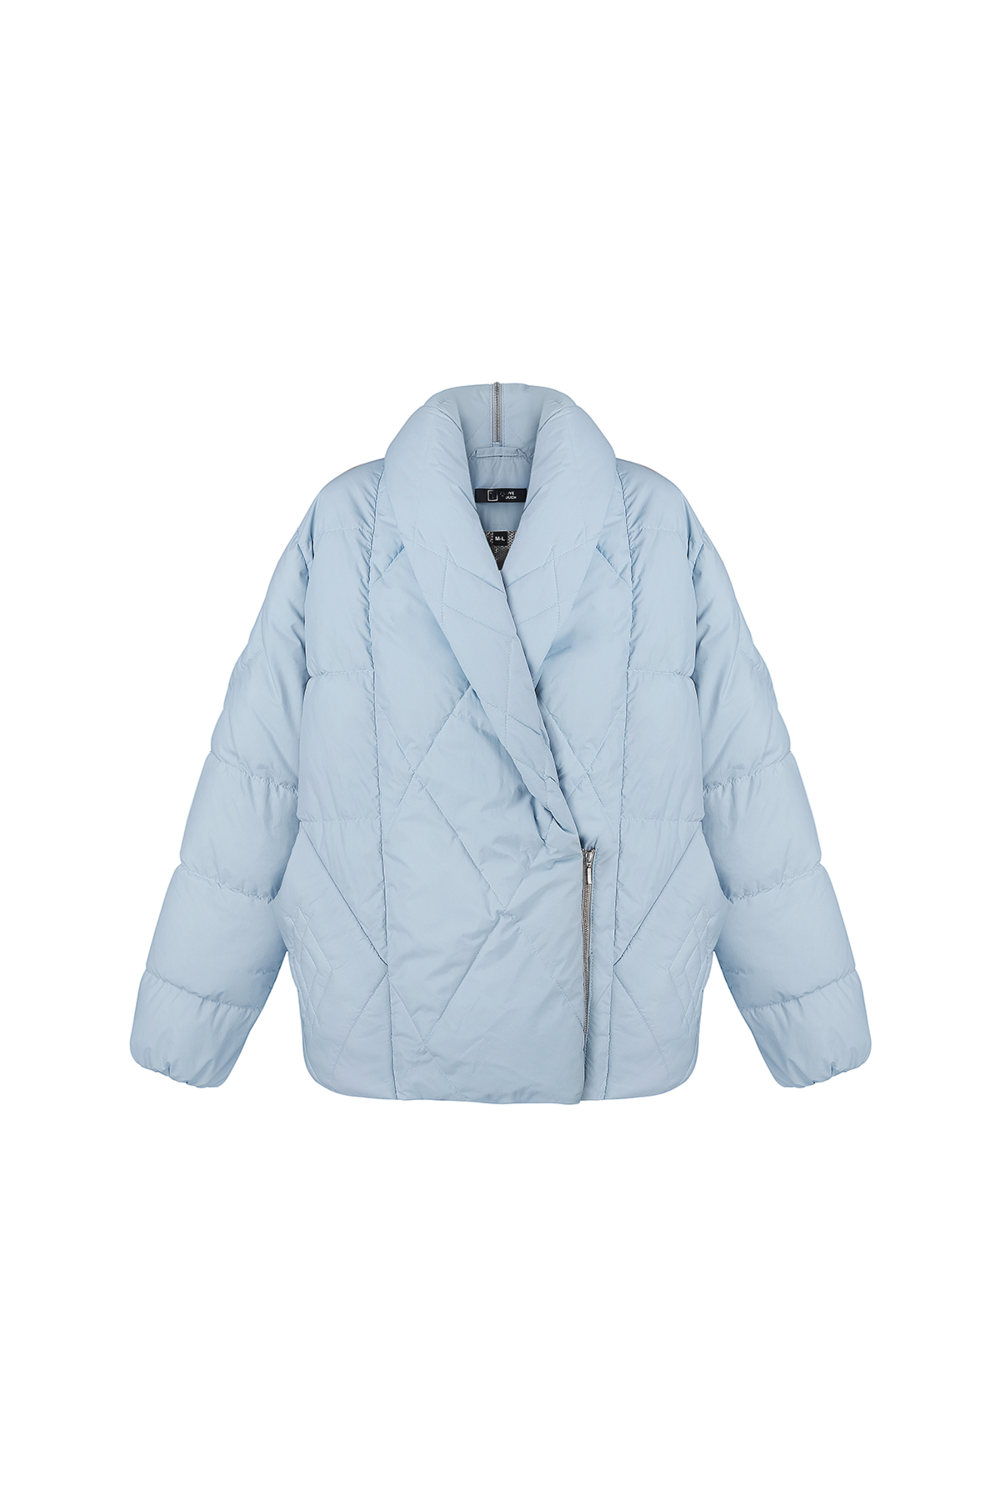 Women's Puffer Jacket — buy in the FloveTouch online store